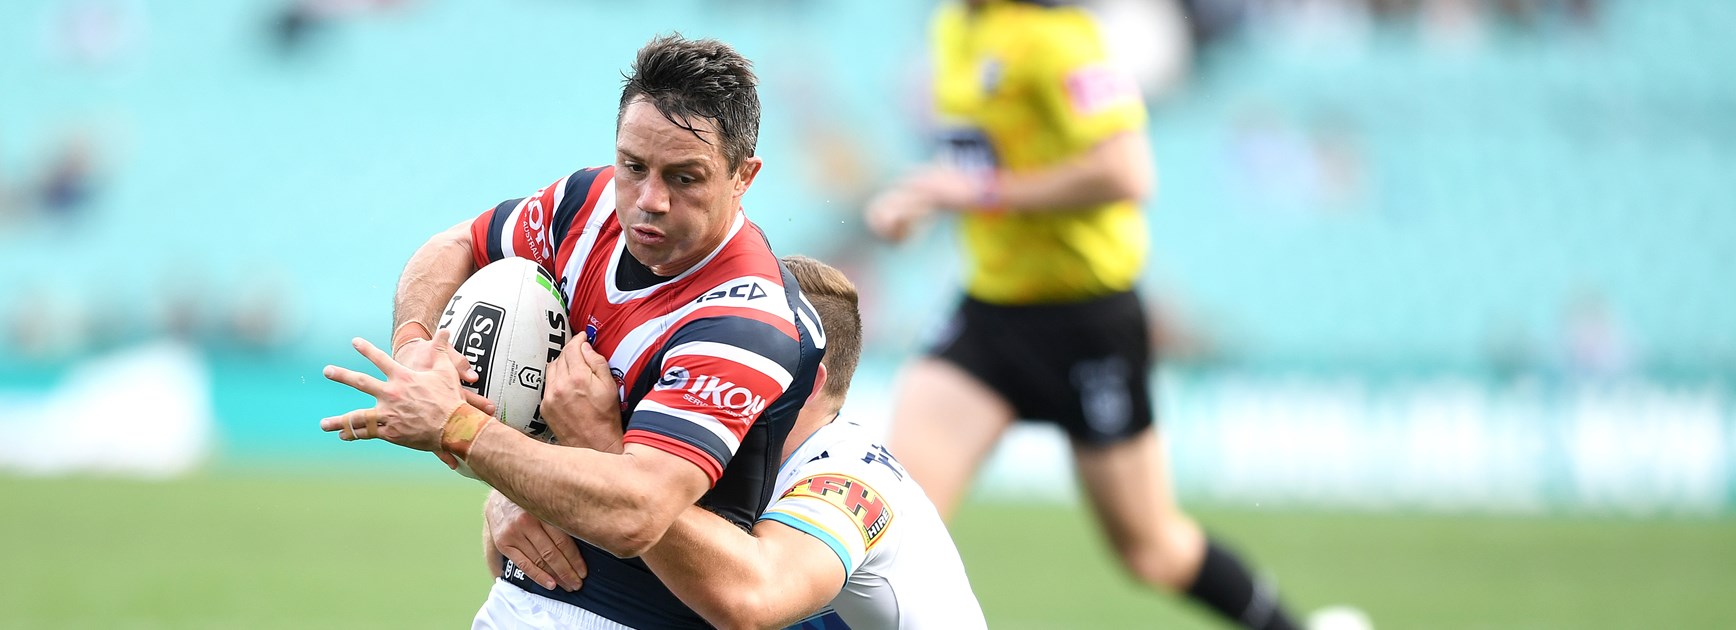 Roosters halfback Cooper Cronk